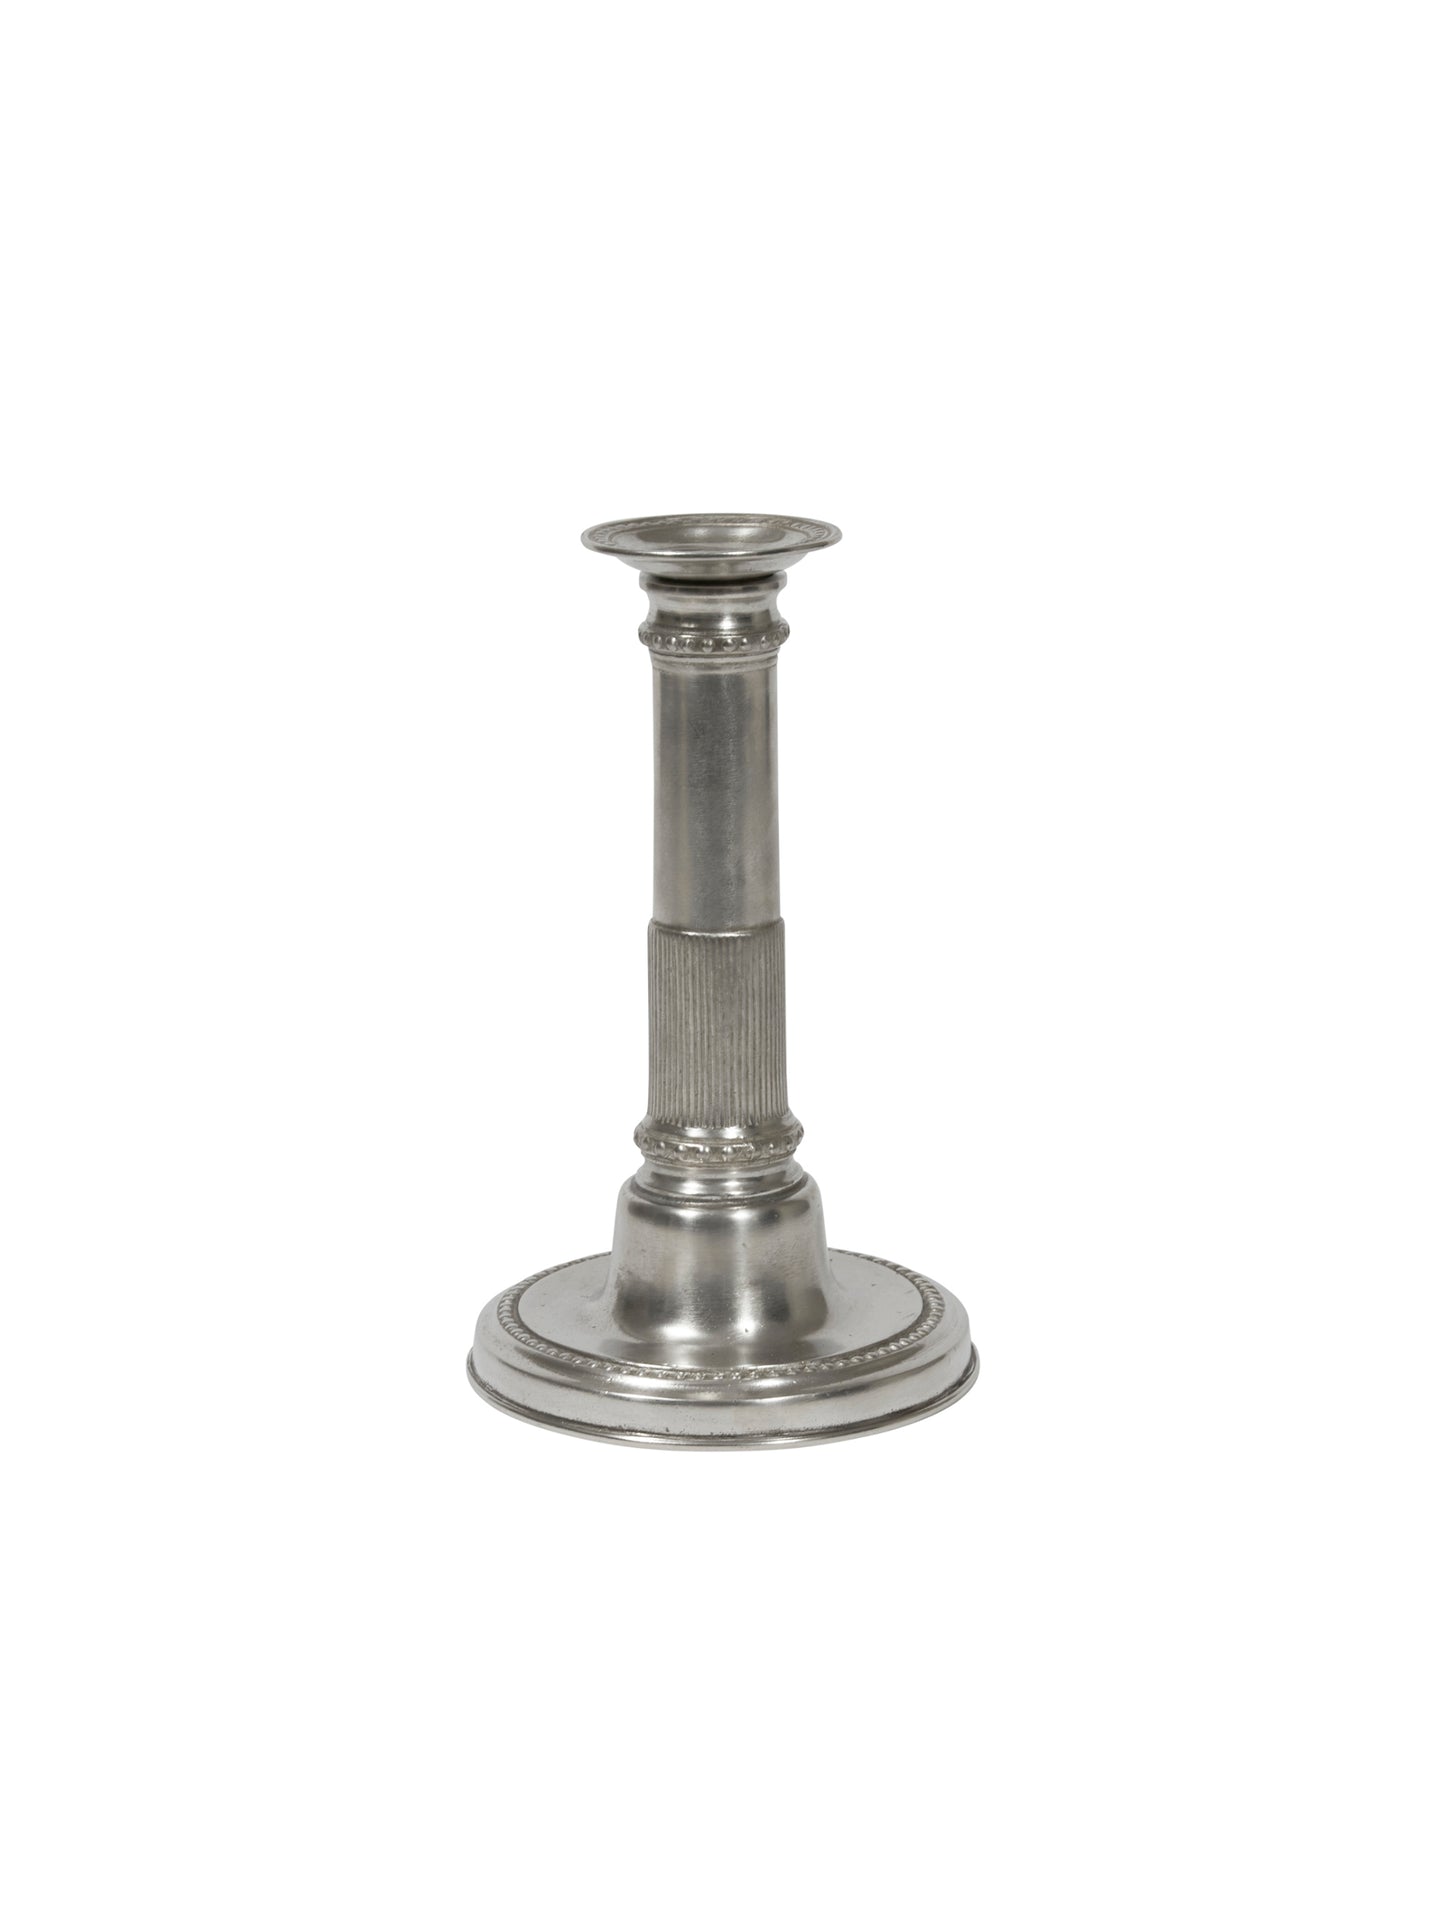 MATCH Pewter Round Based Candlestick Weston Table